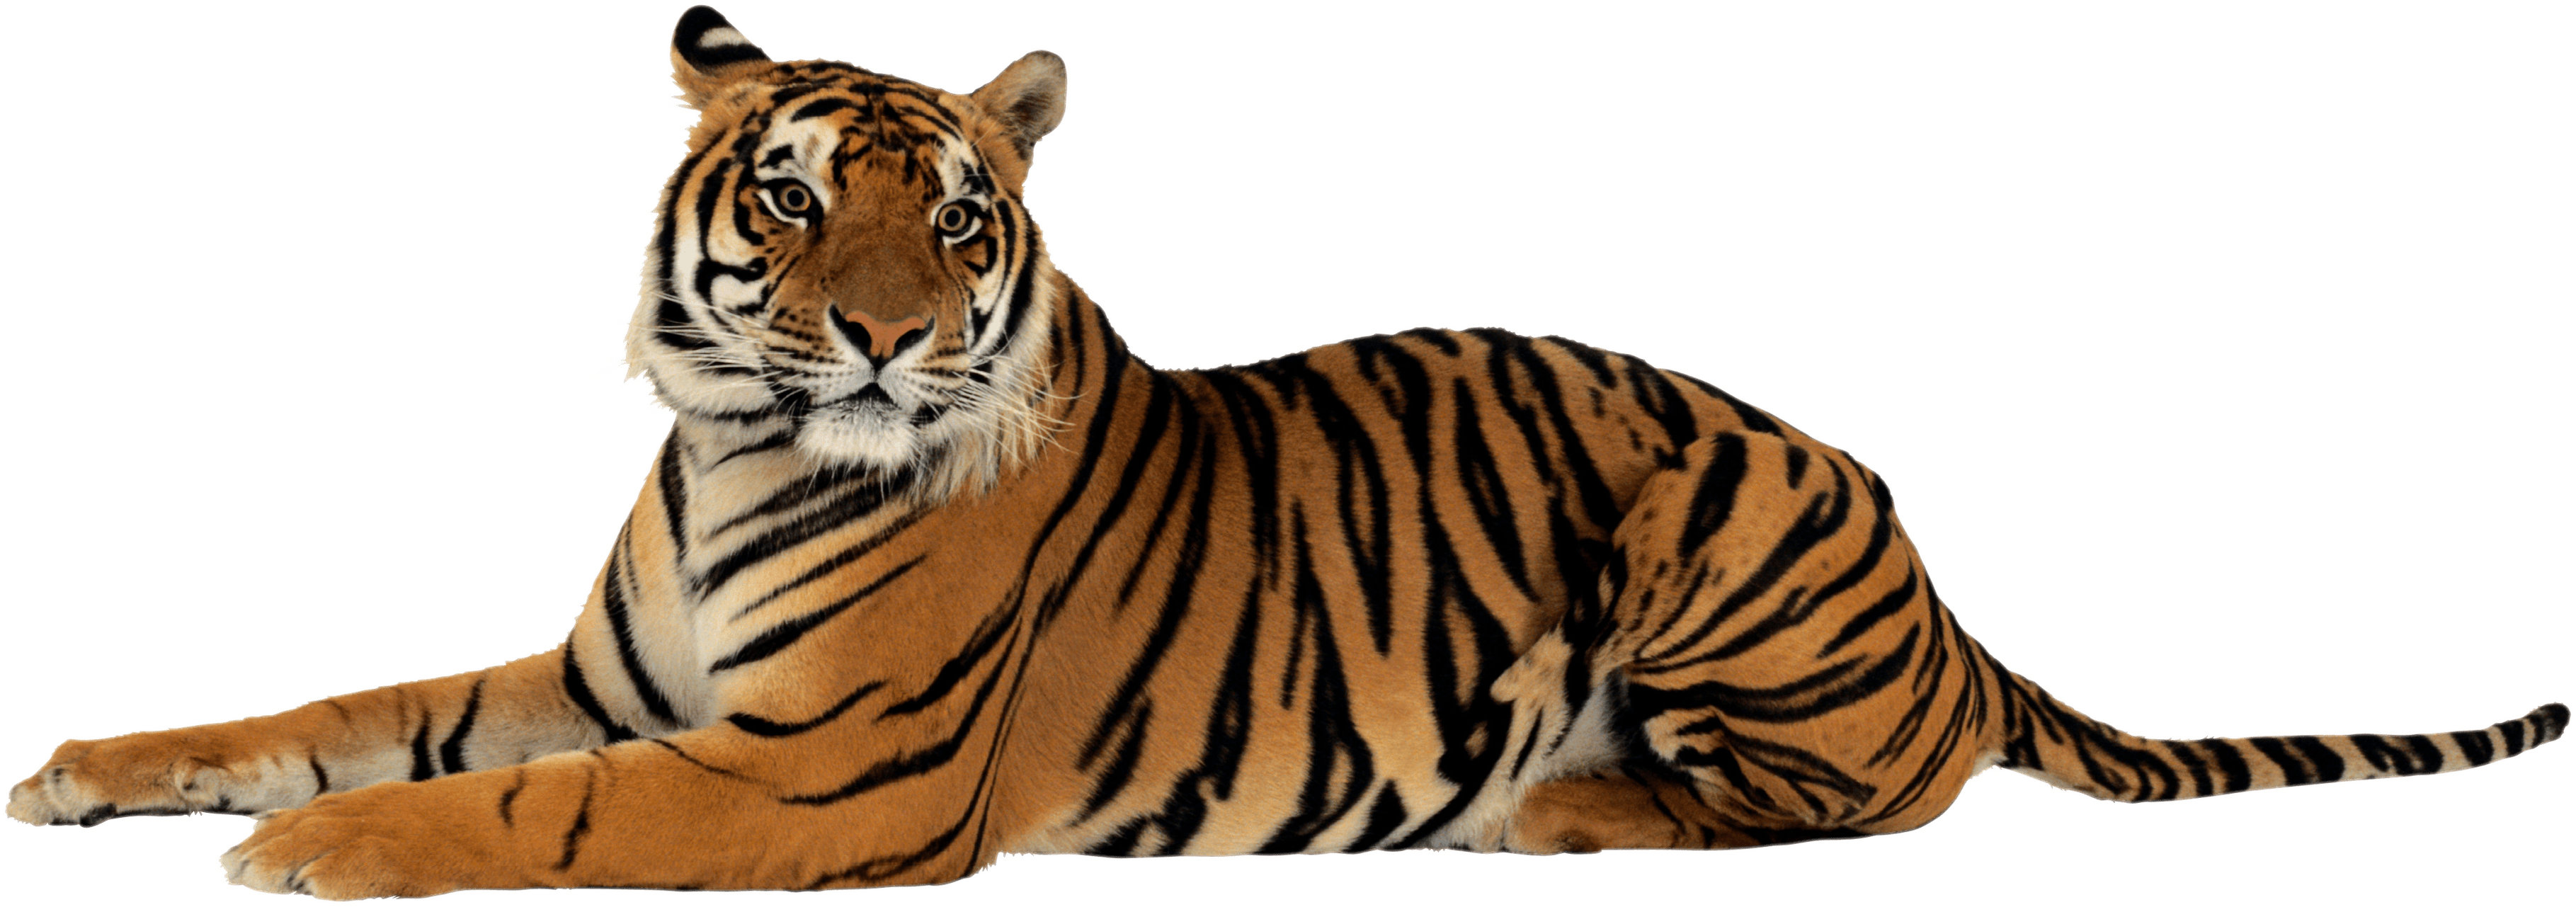 Tiger Drawing Images